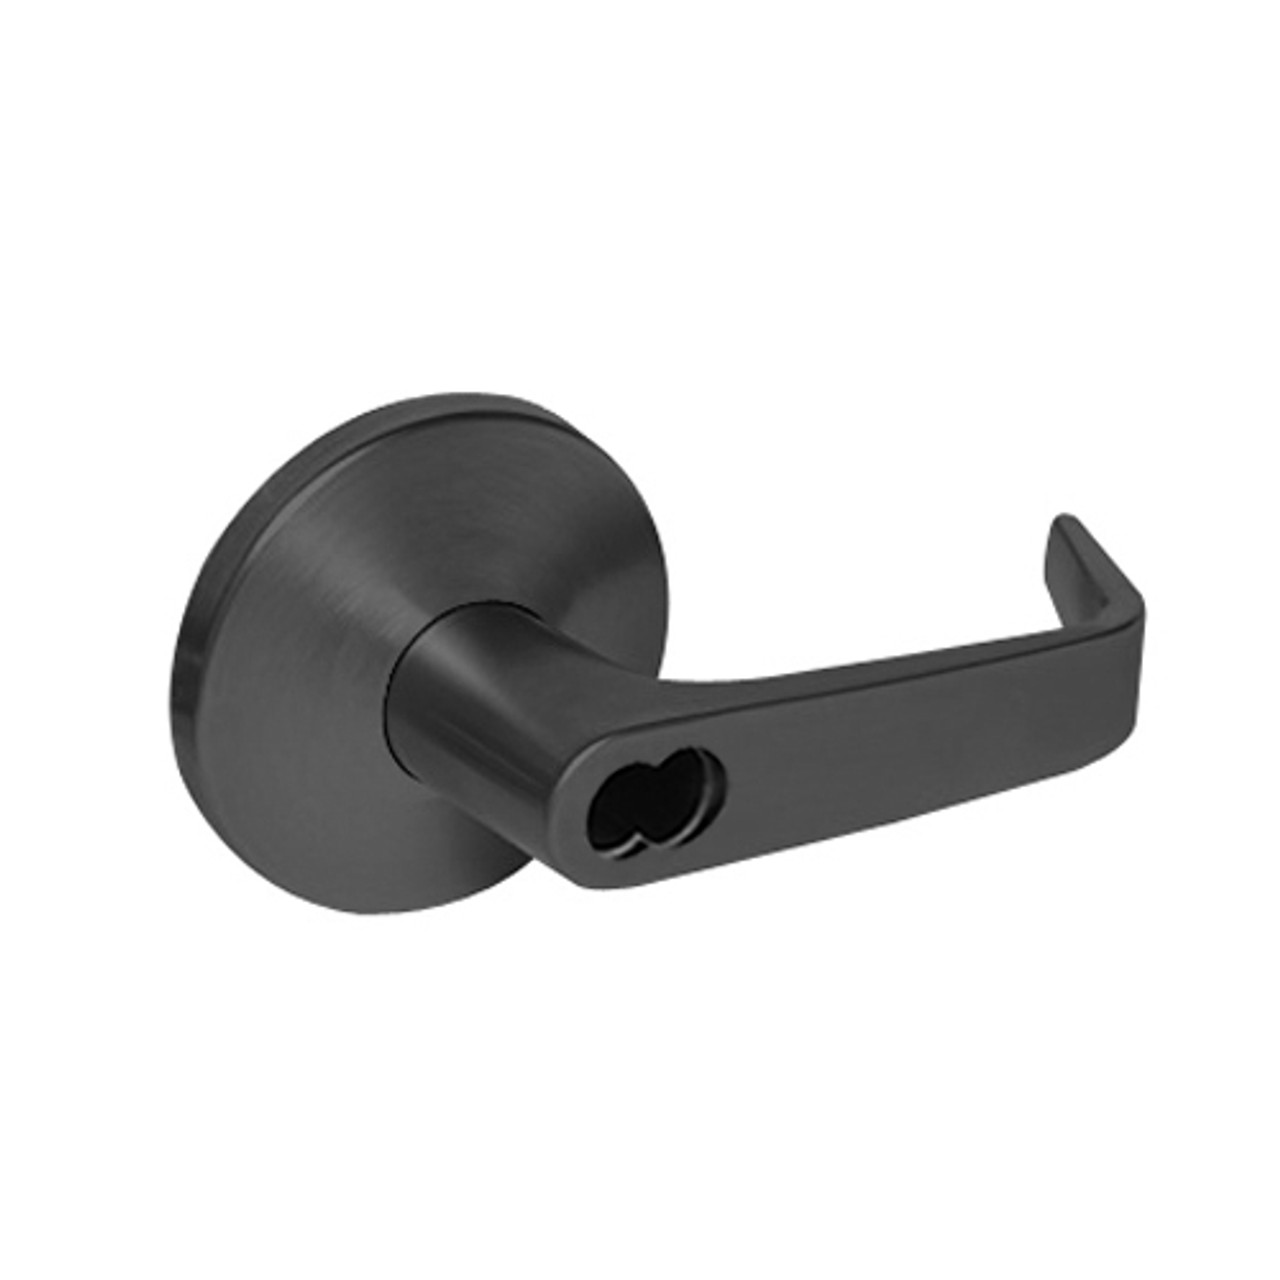 9K47AB15LSTK622 Best 9K Series Entrance Cylindrical Lever Locks with Contour Angle with Return Lever Design Accept 7 Pin Best Core in Black